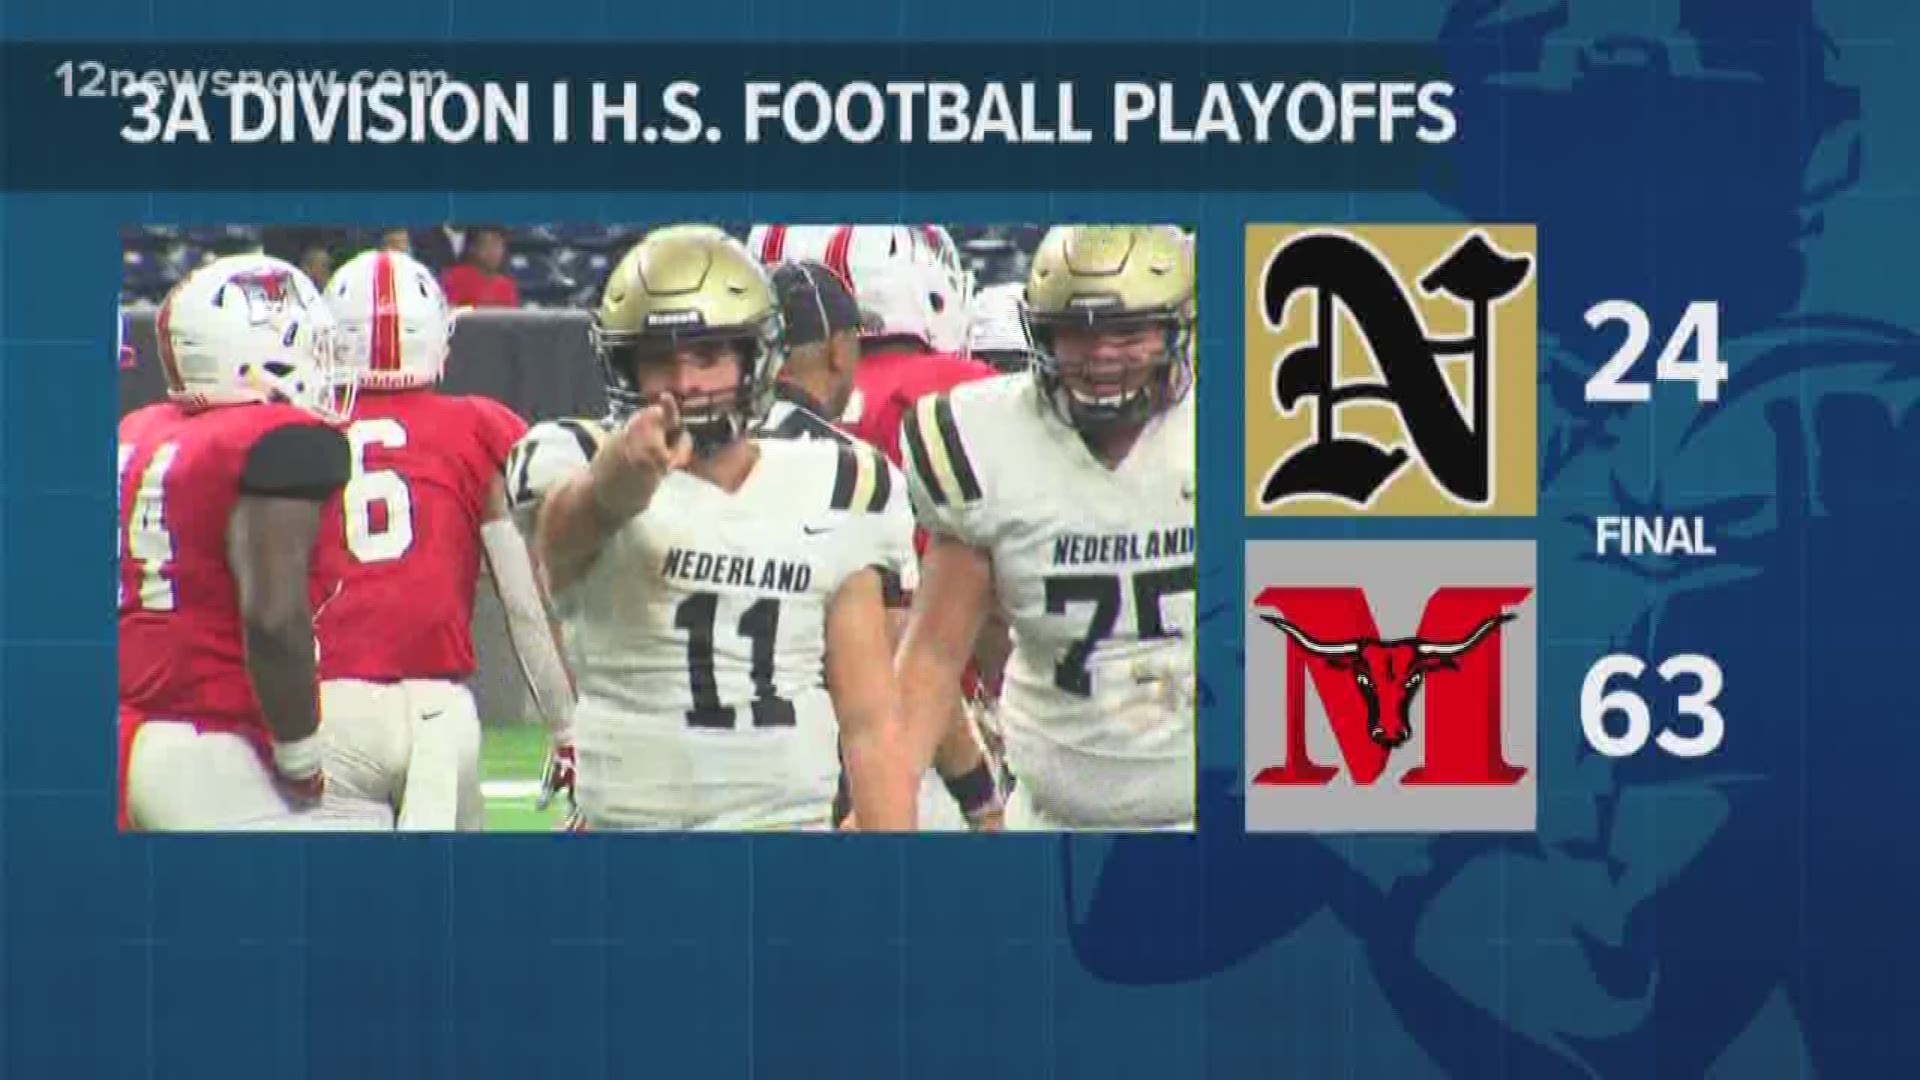 Aanpassing Vet dok 5A DII Area Football: Nederland's season ends to Marshall | 12newsnow.com